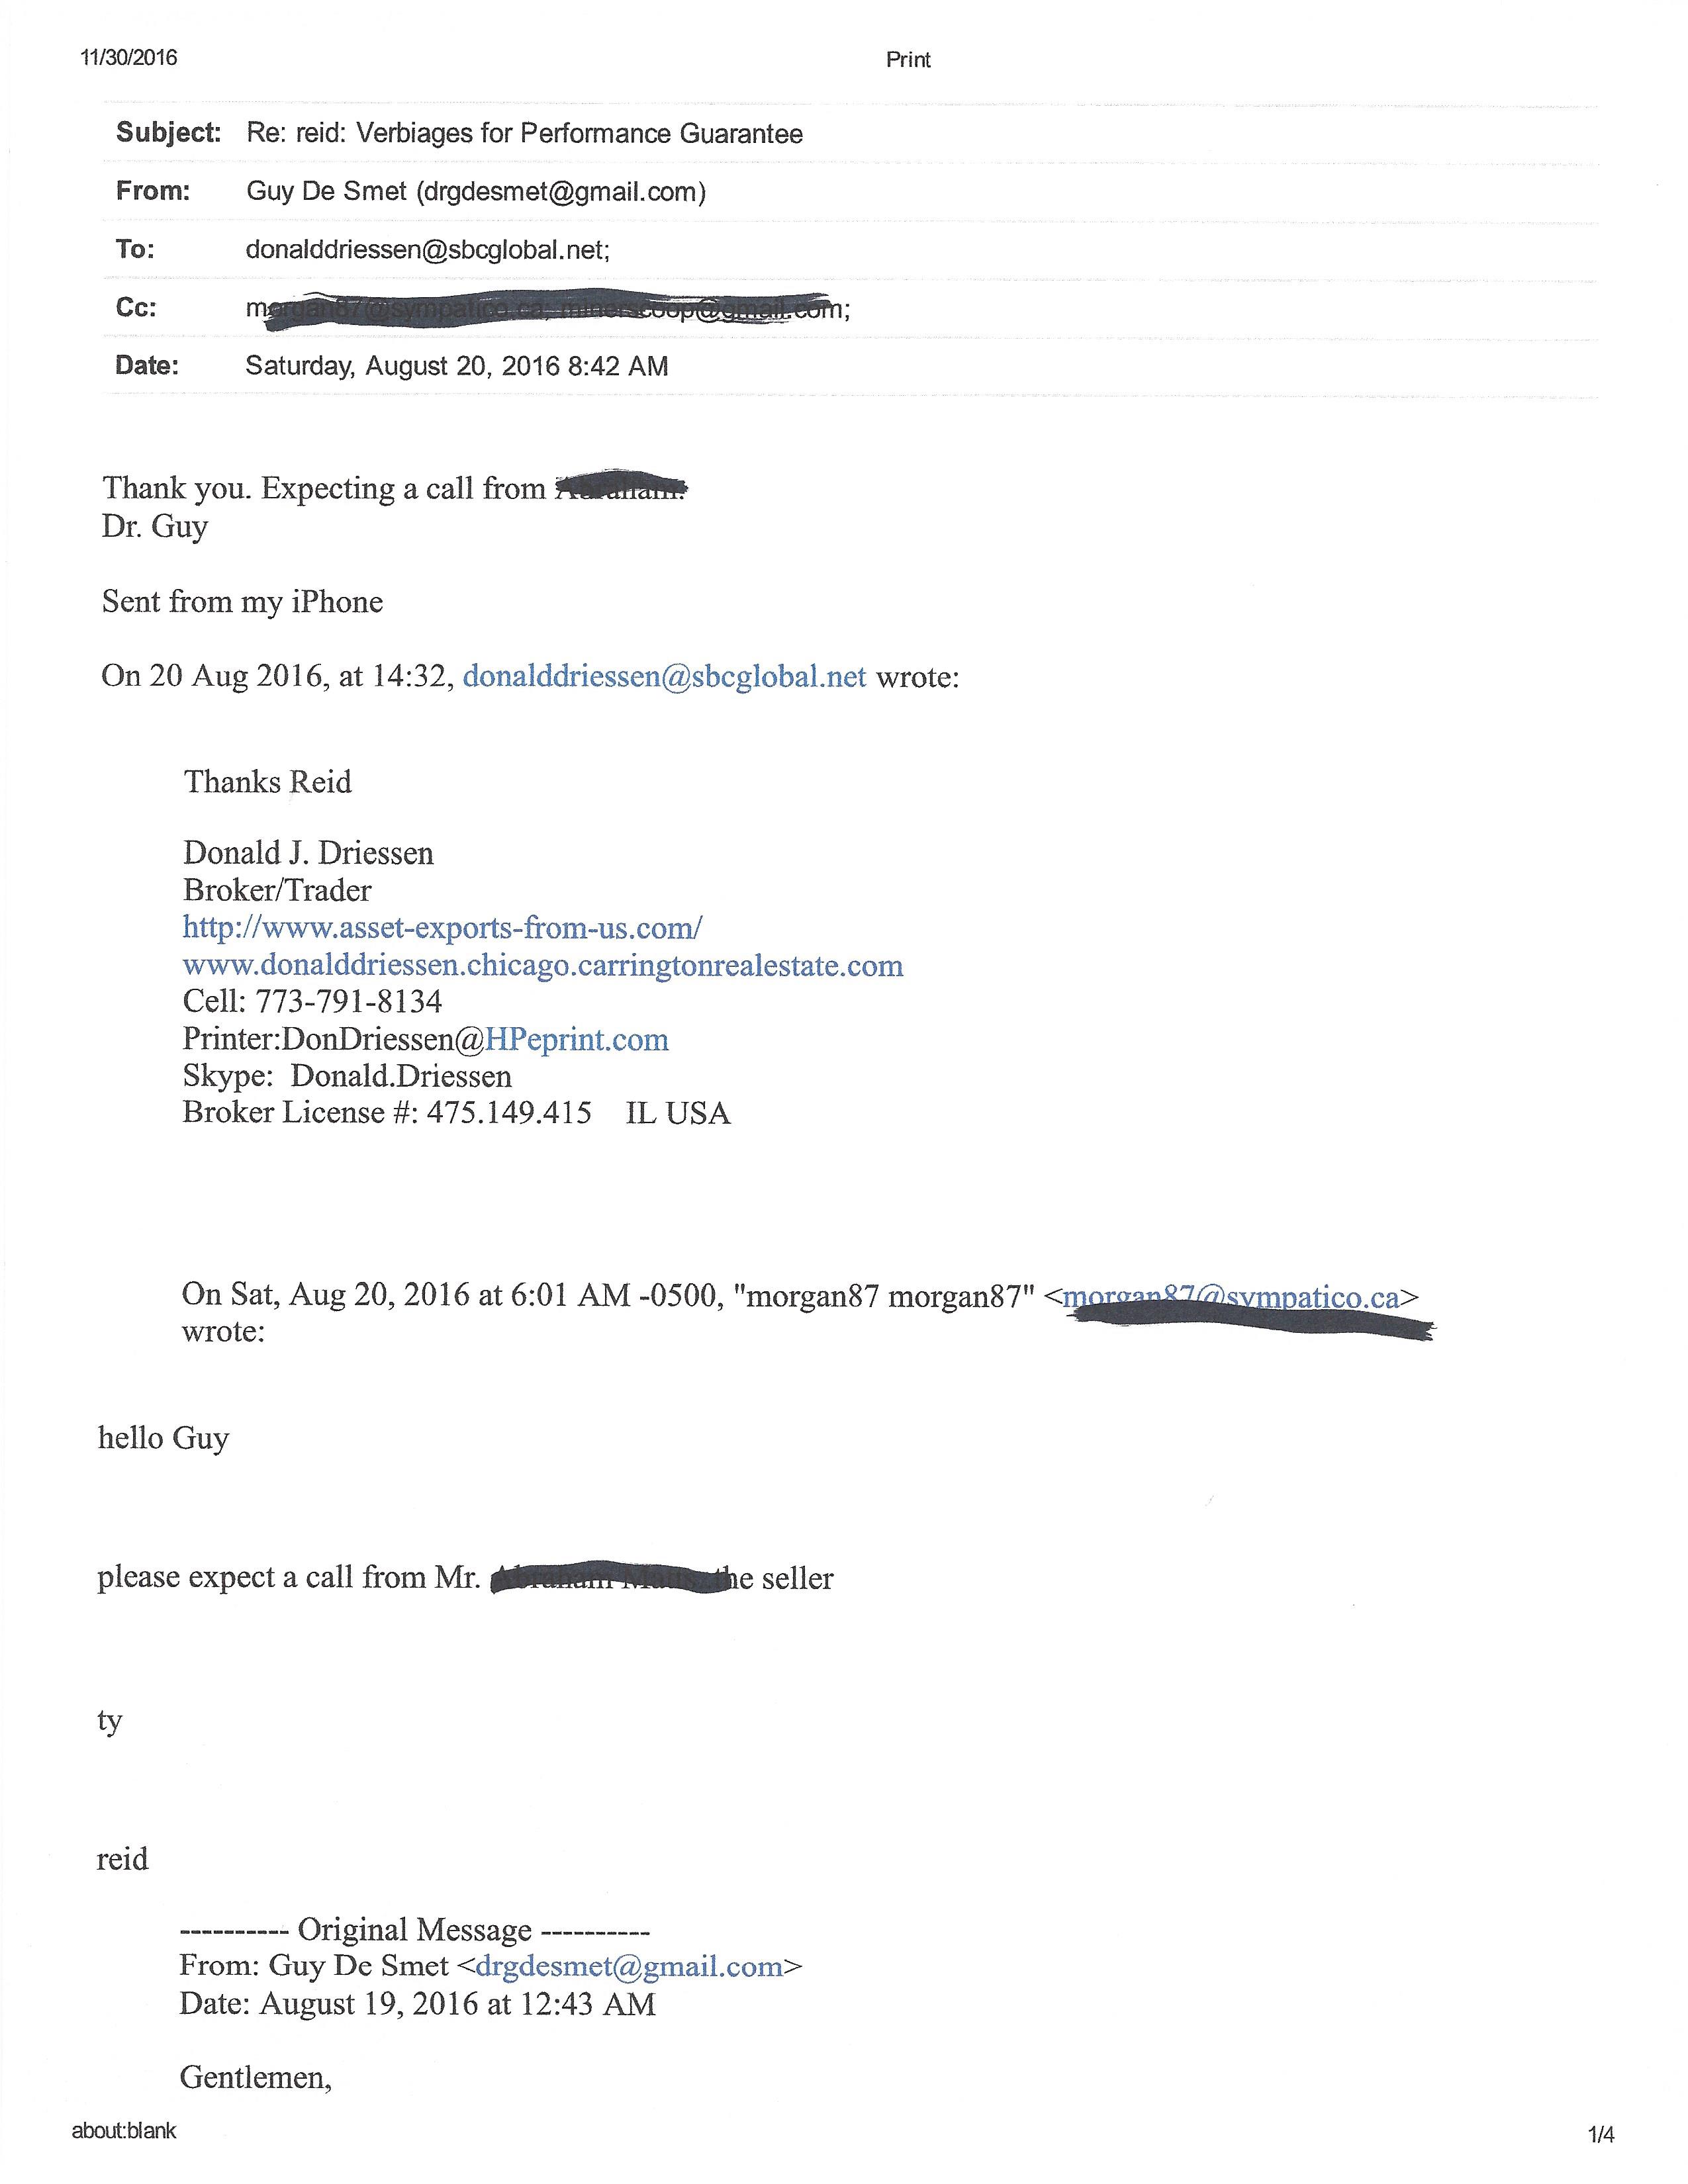 PDF of Email from Dr Guy De Smet Banking Lie